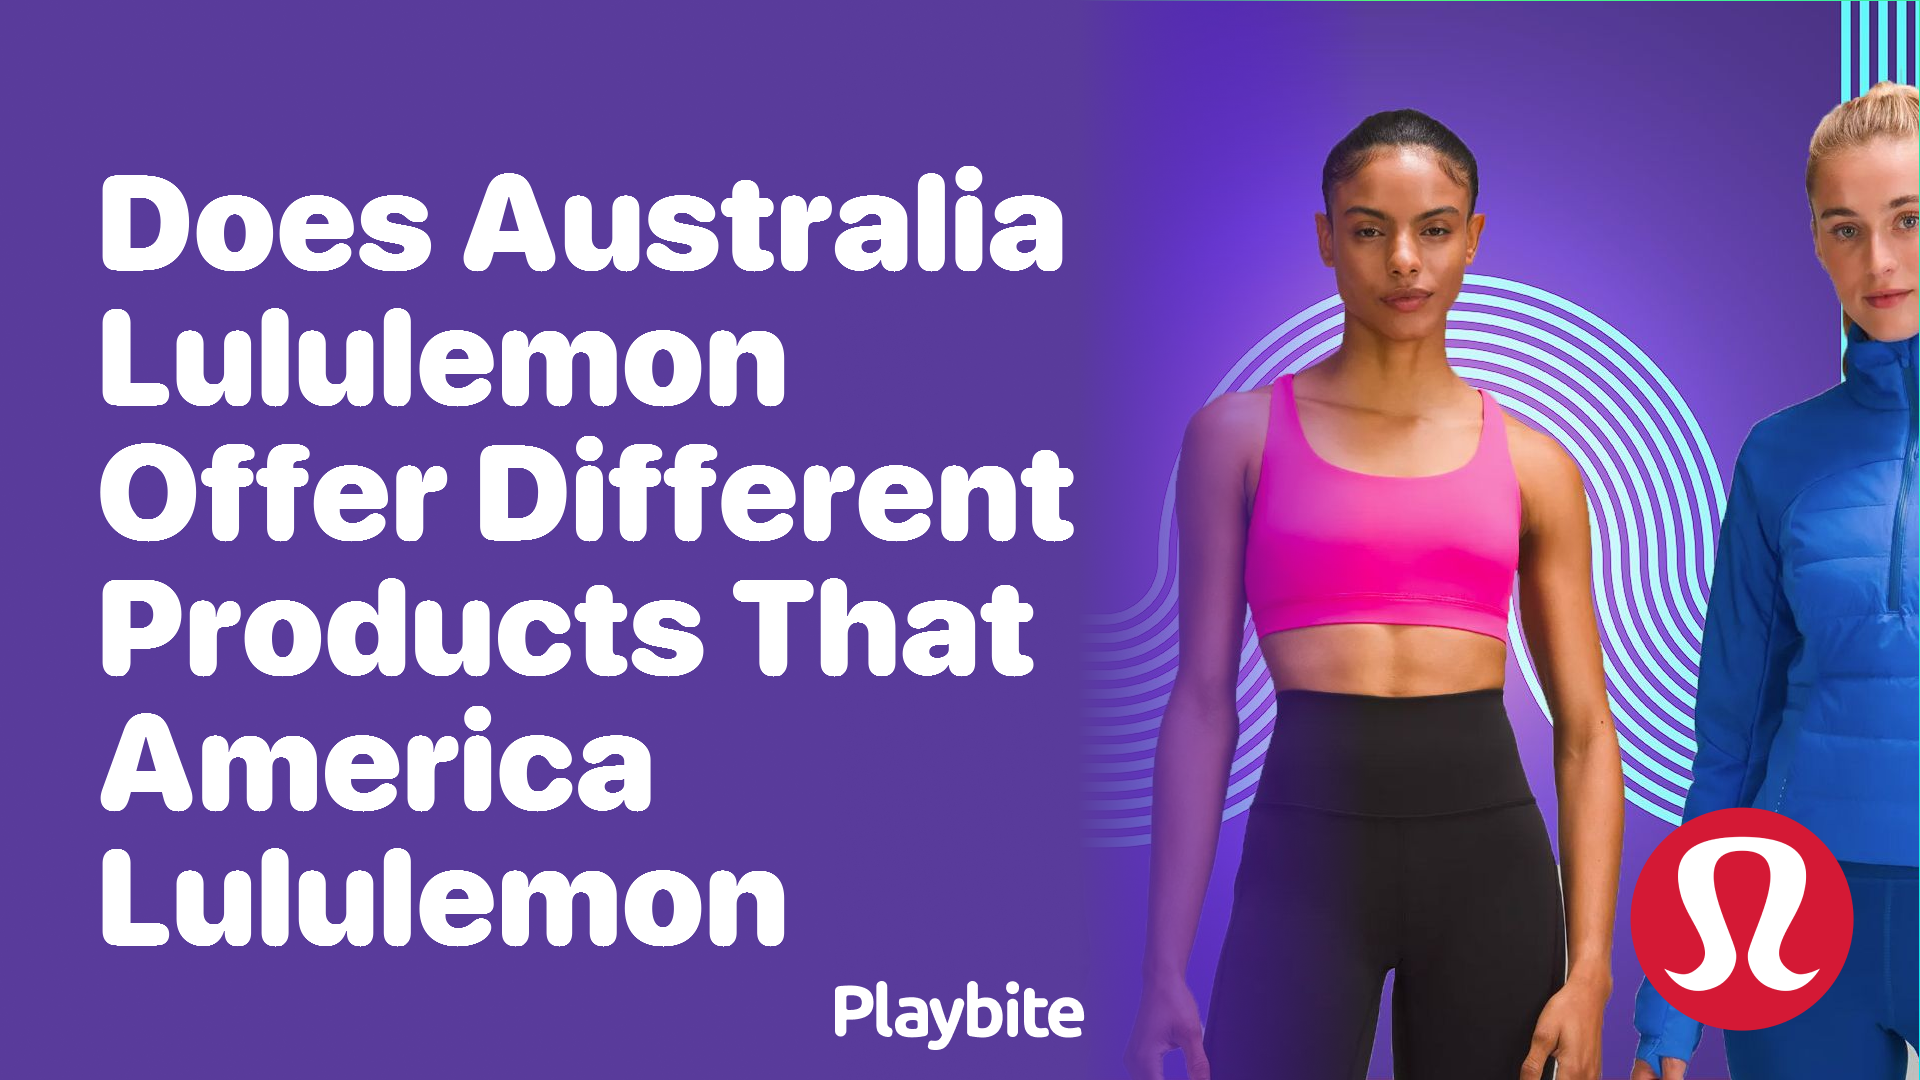 Does Australia Lululemon Offer Different Products Than America